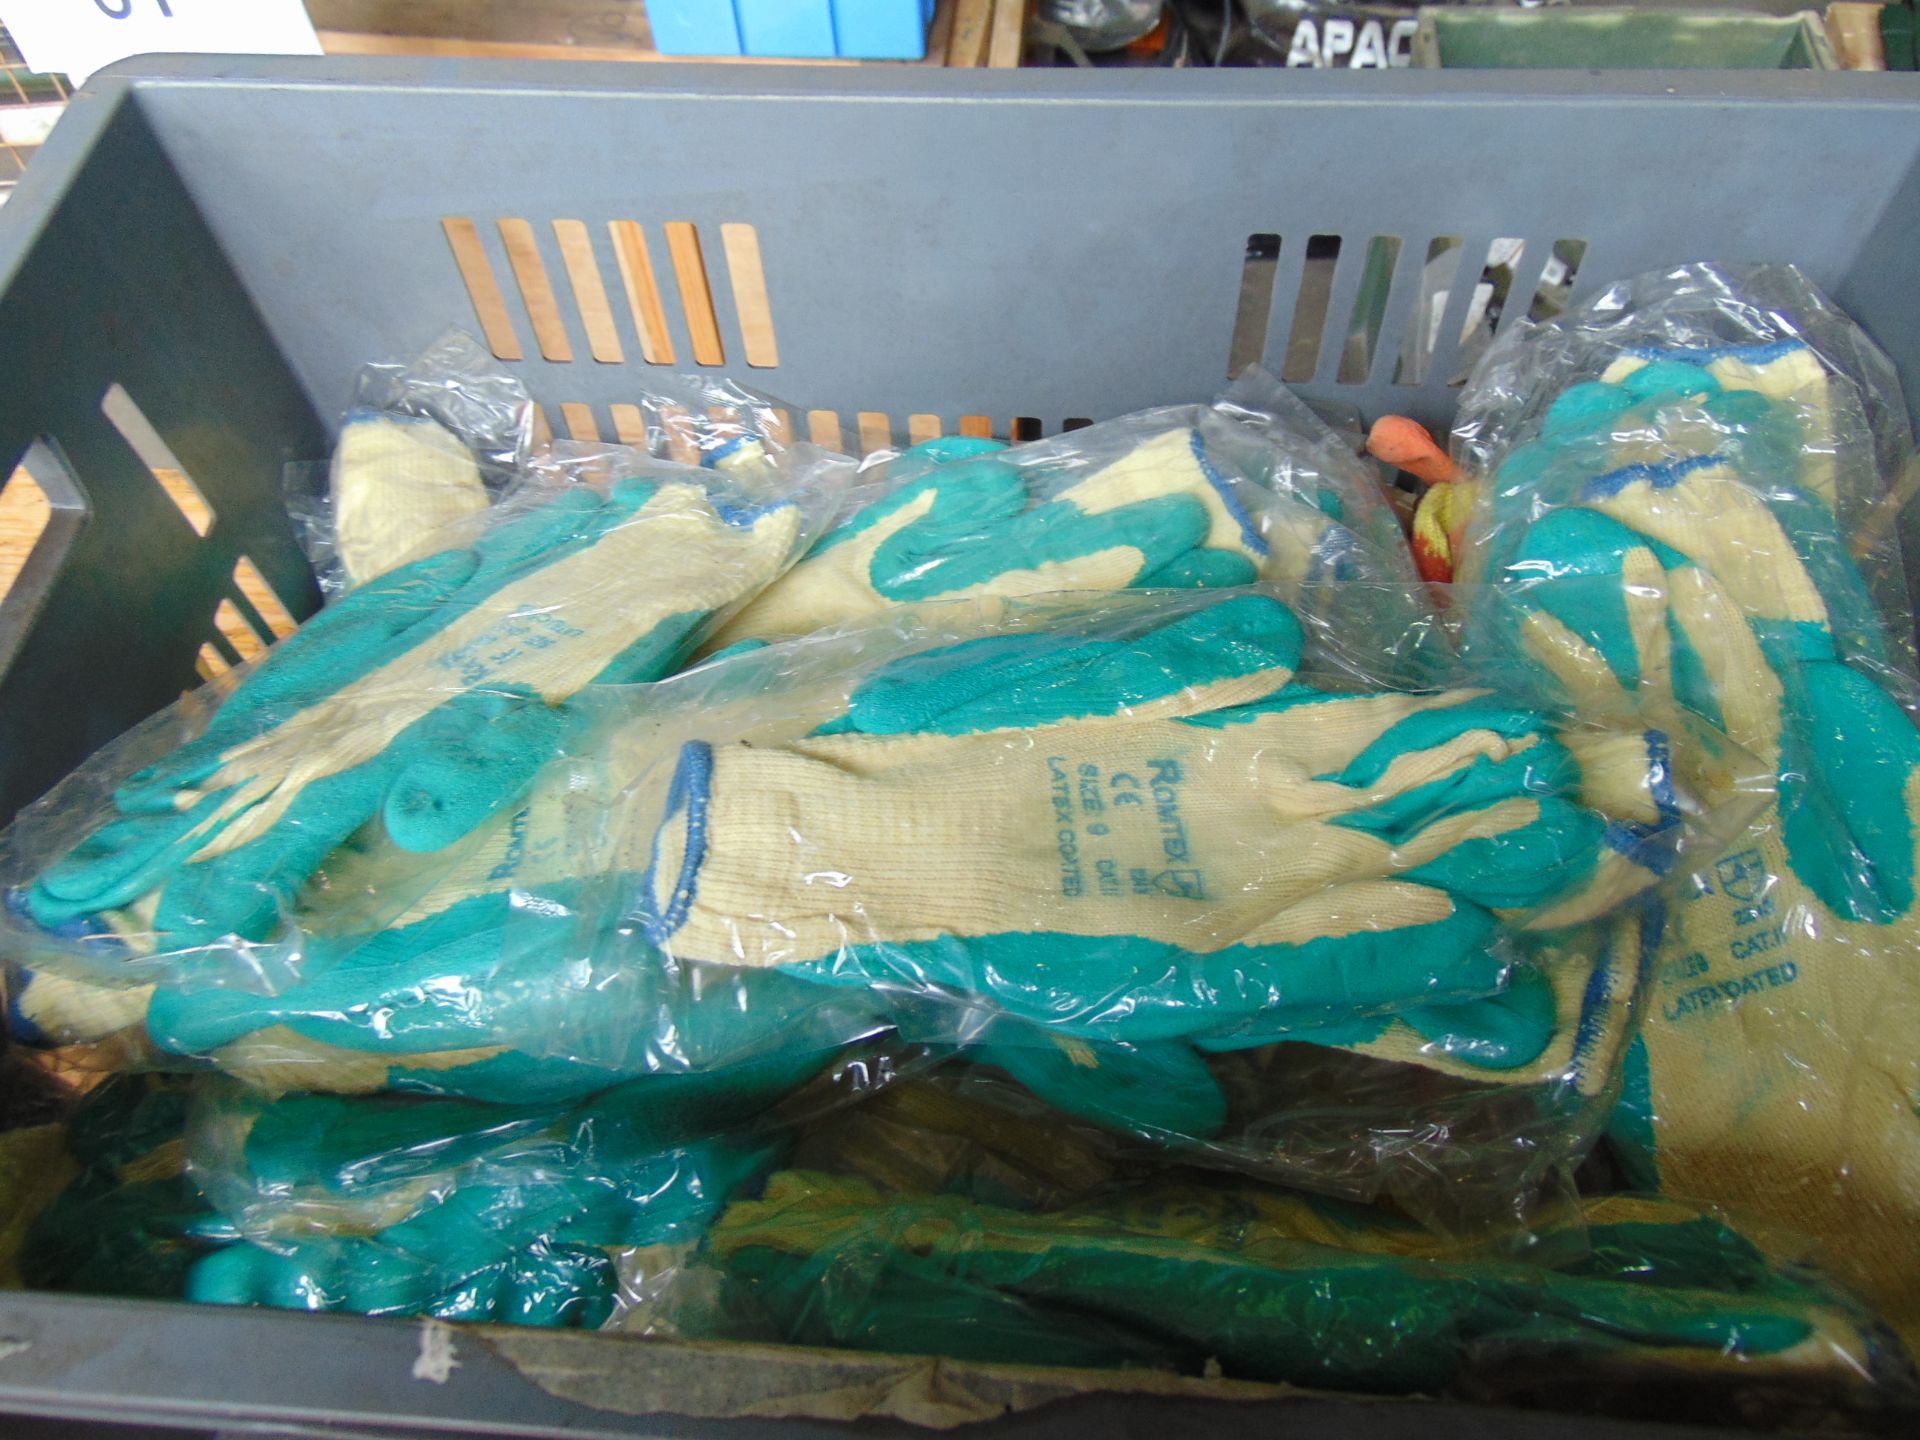 38 Pair Unissued ROMTEX later Coated Work Gloves - Image 4 of 4